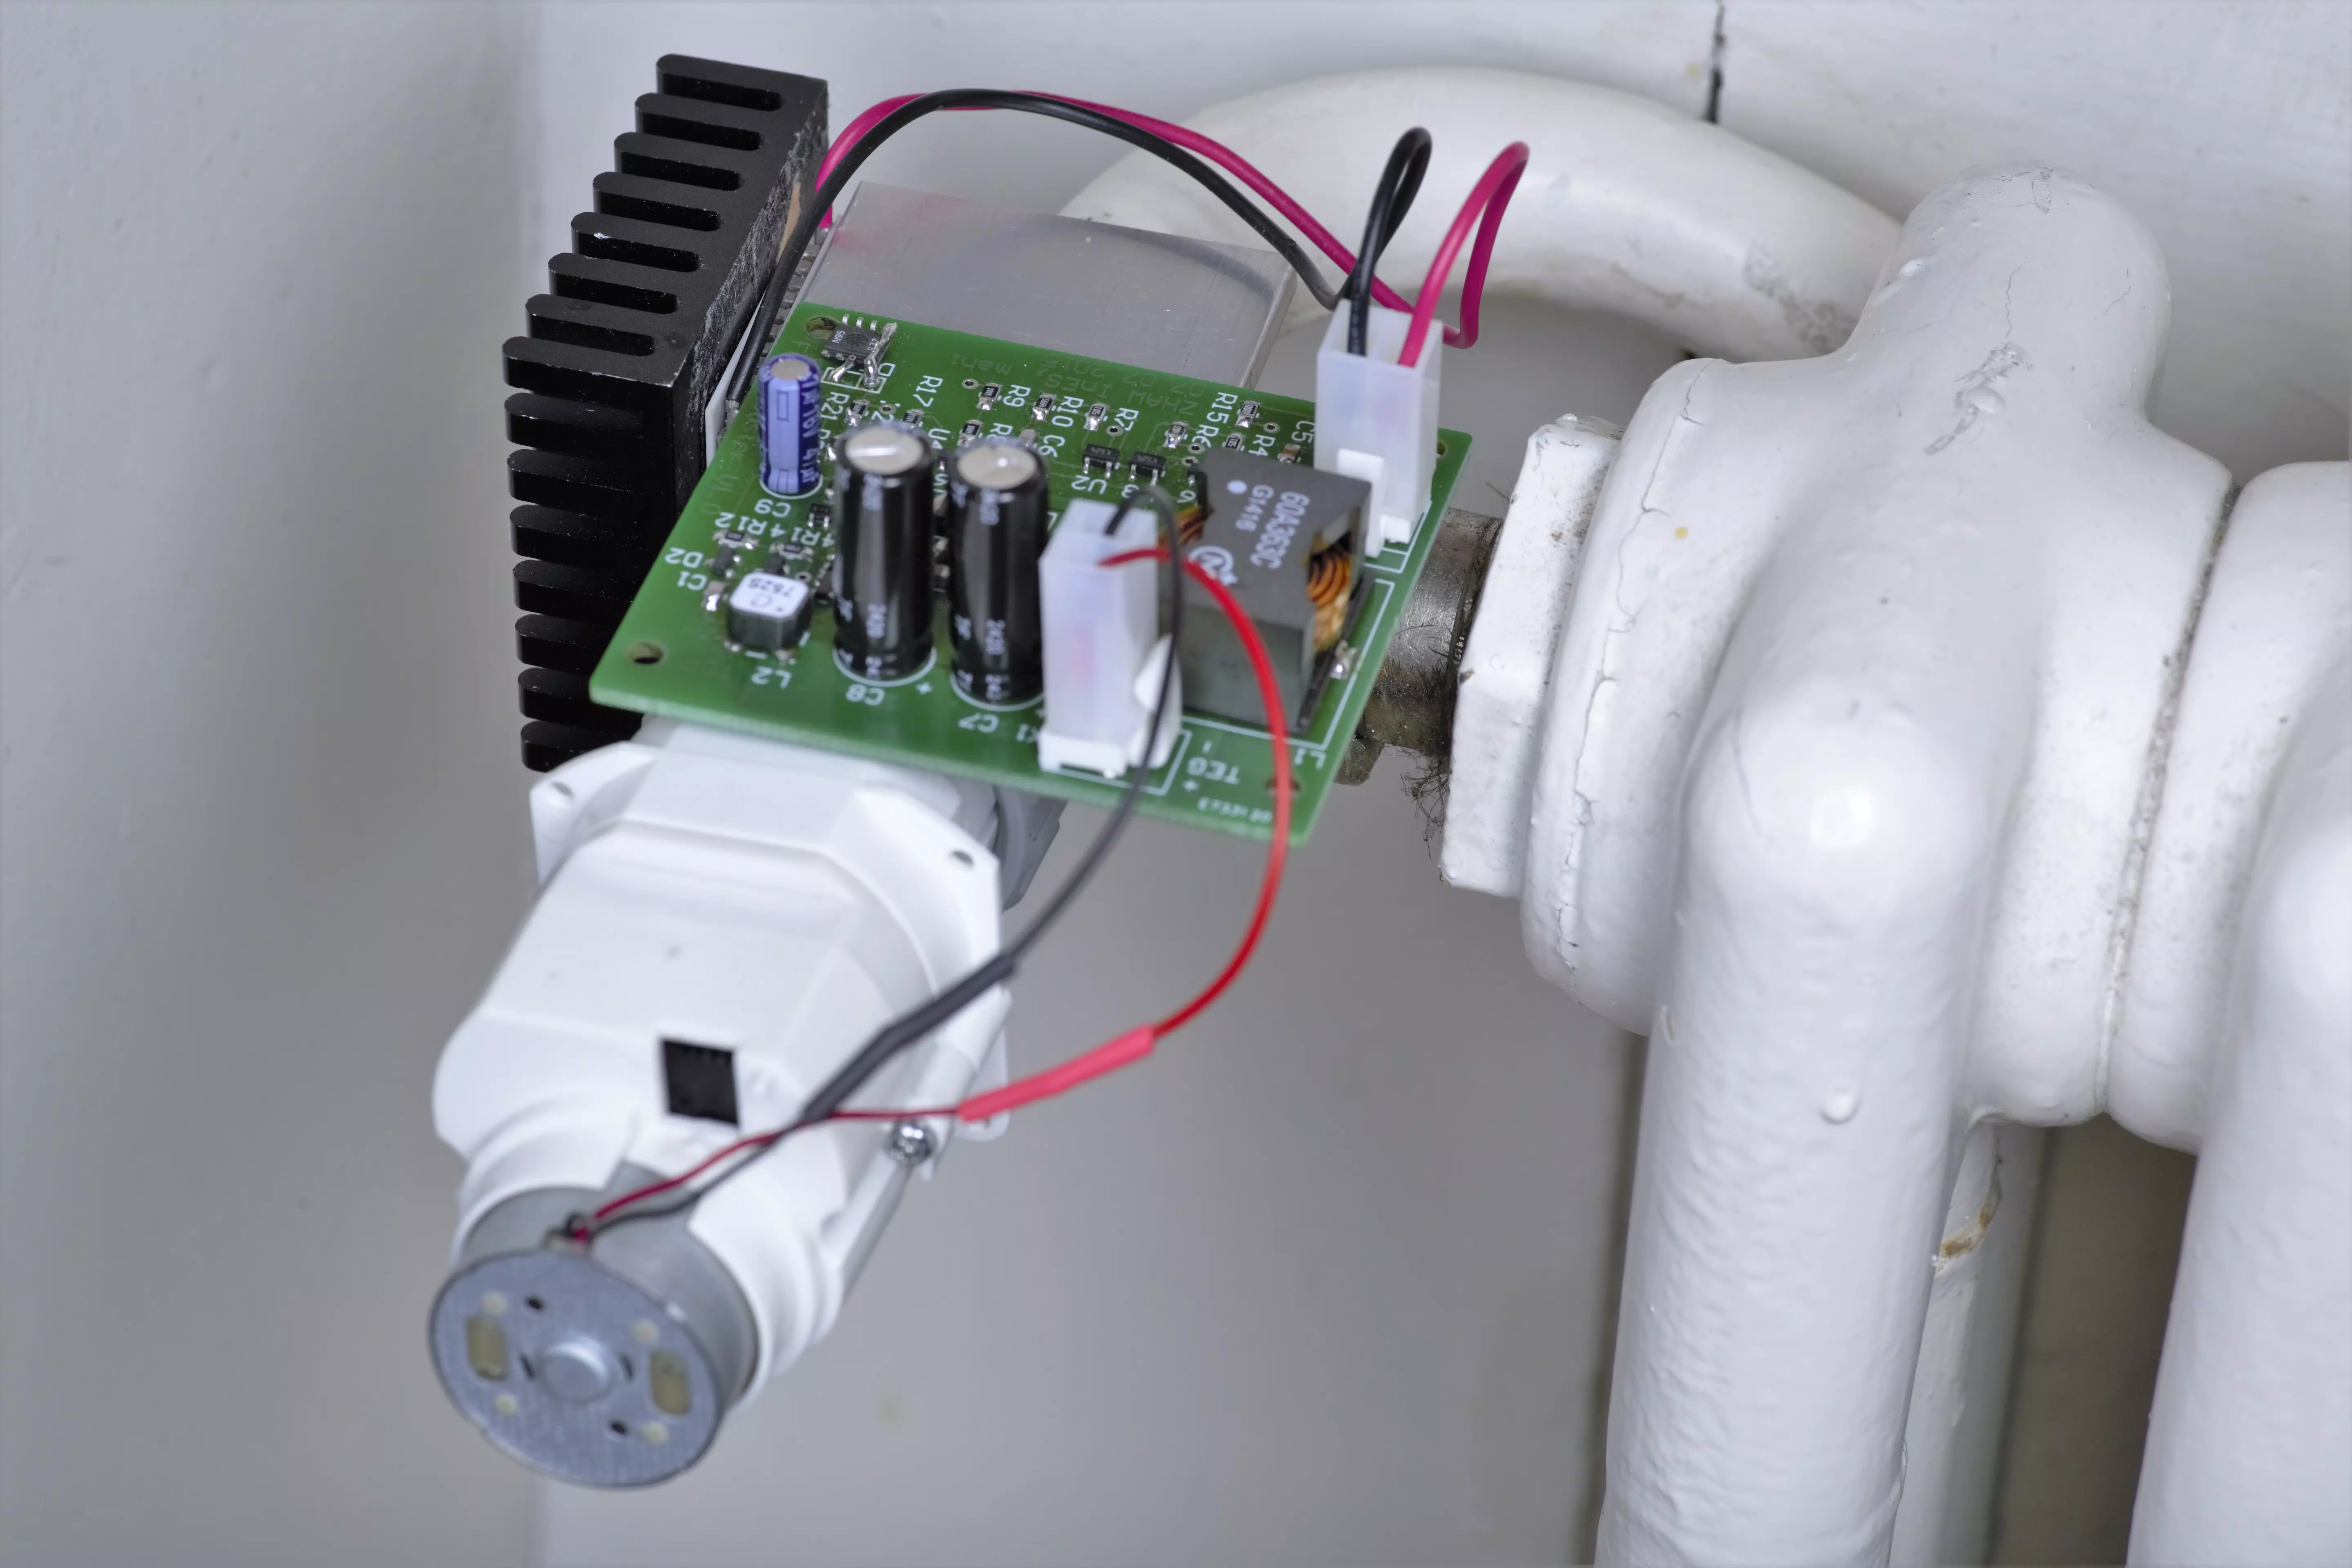 Prototype of an autarkic thermostatic head for home automation